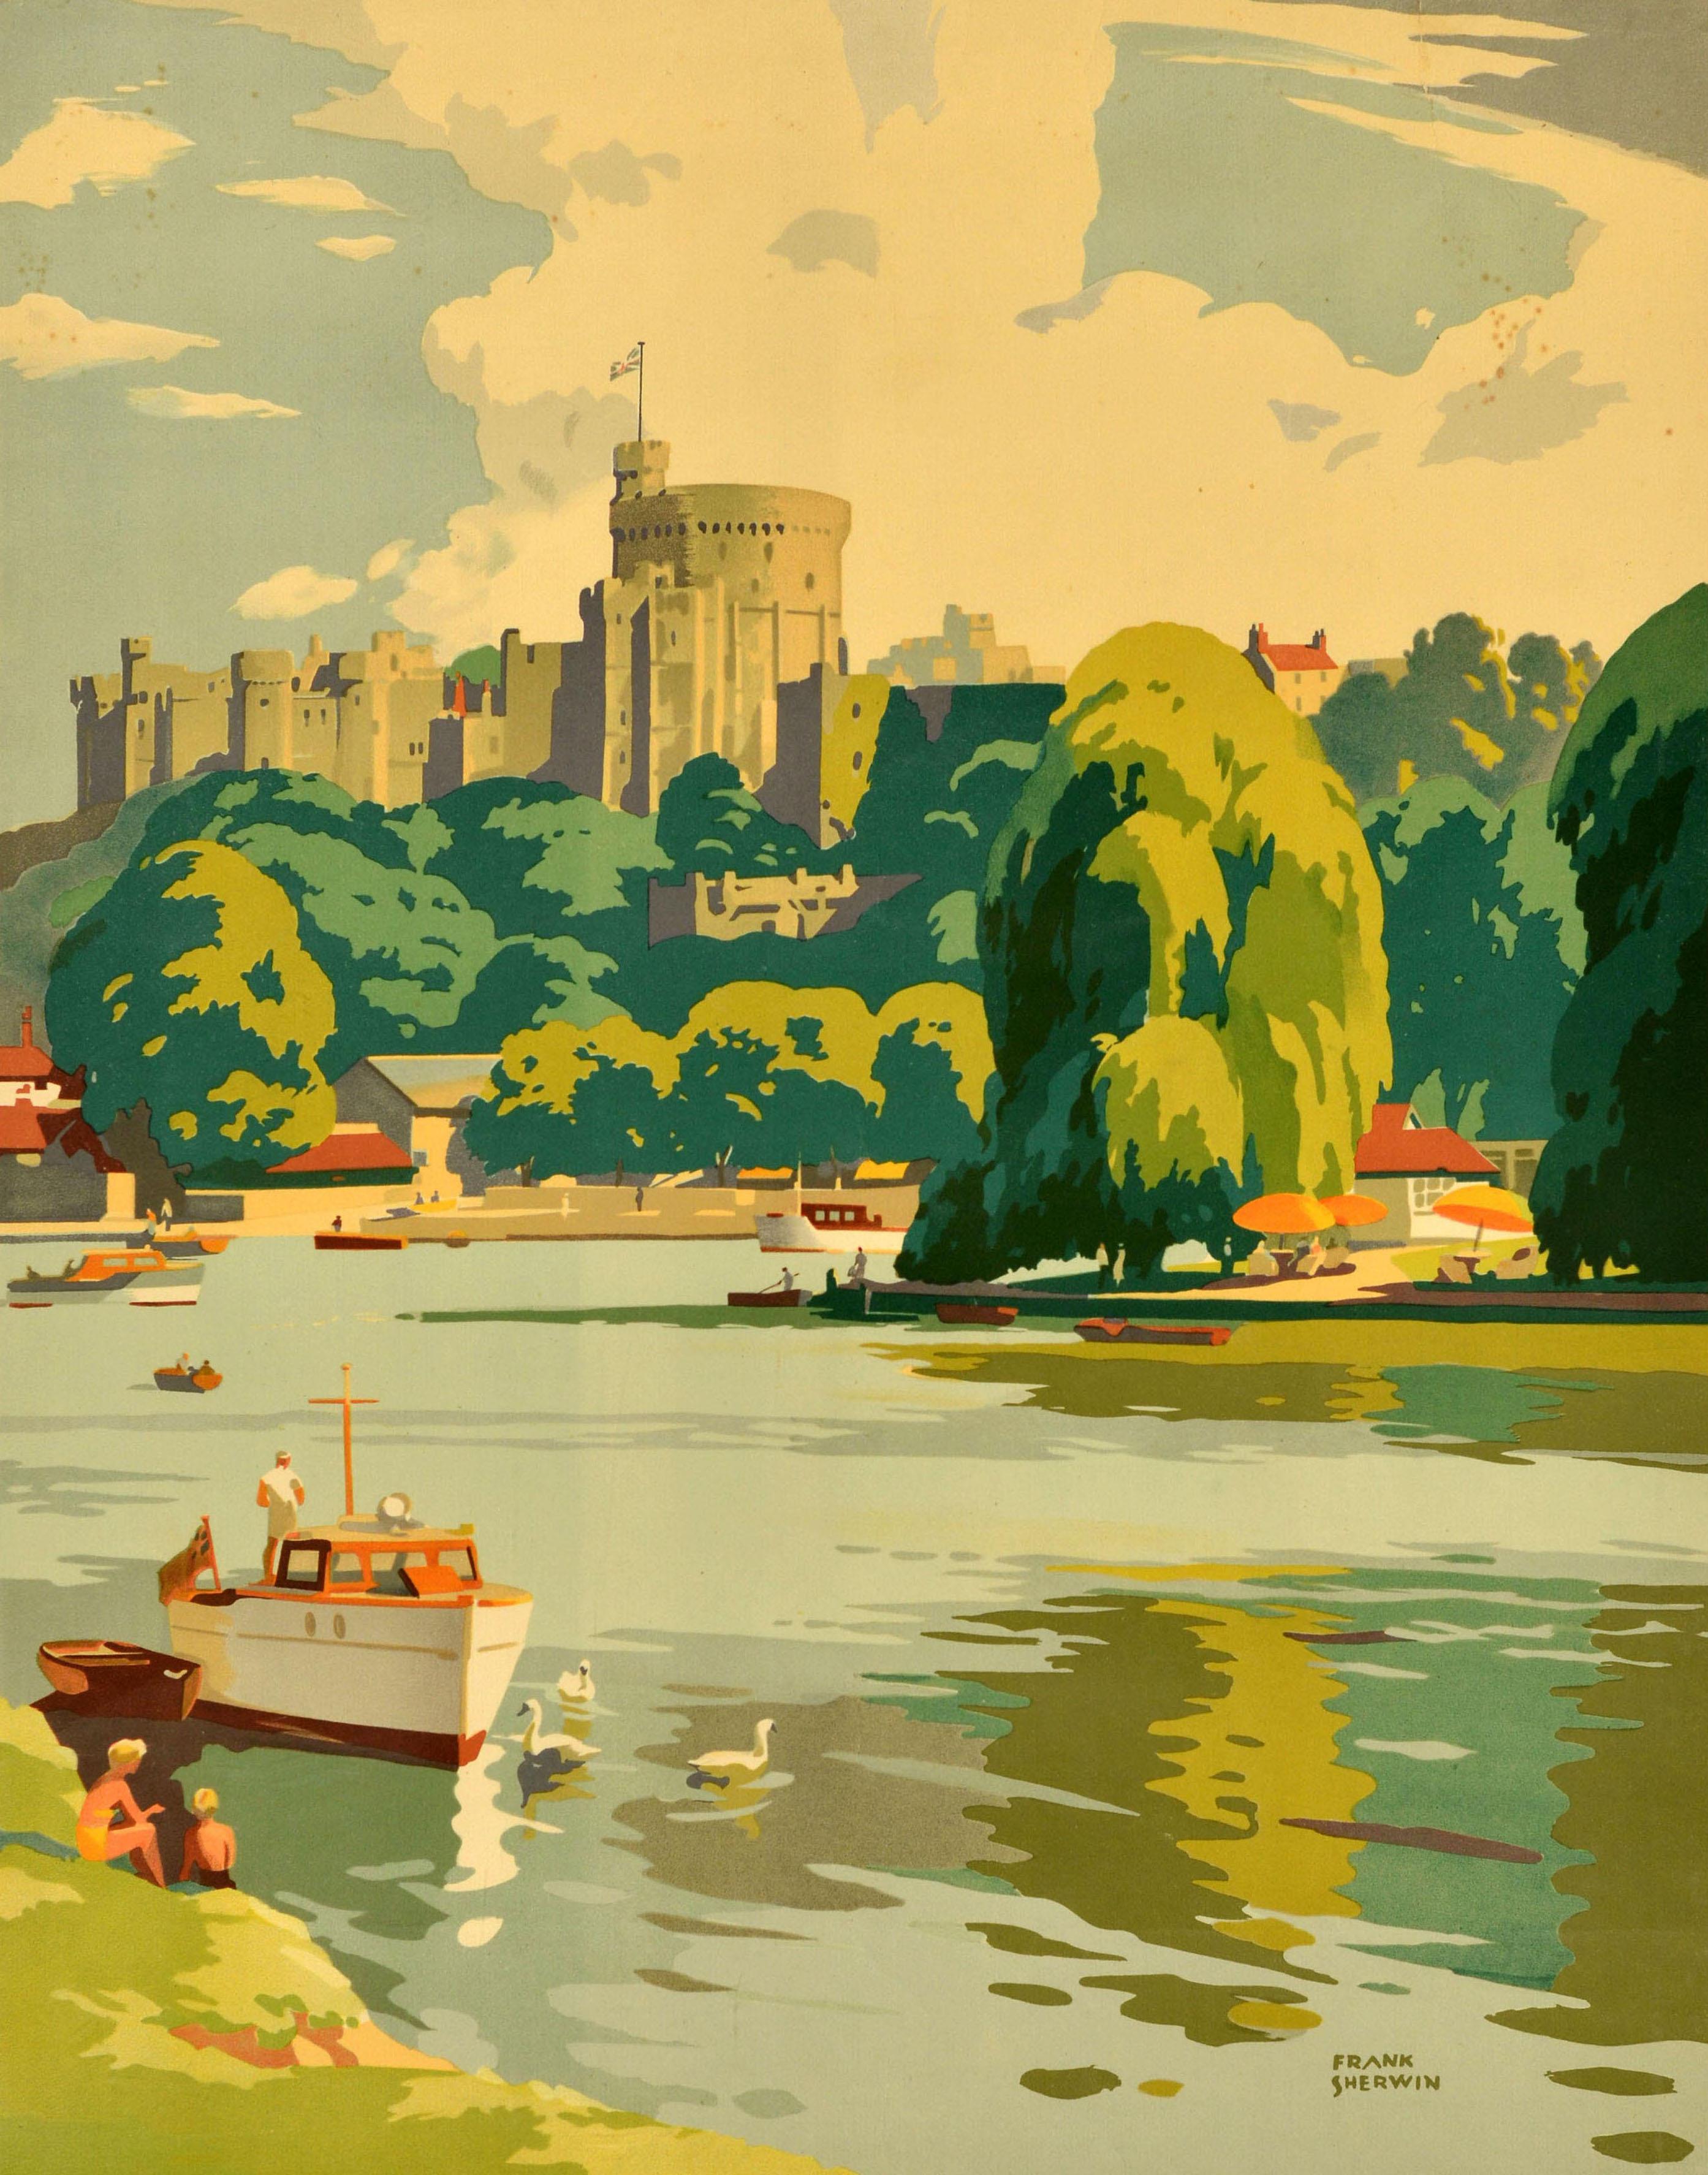 Original vintage travel poster - Windsor See Britain by Train British Railways - featuring scenic artwork by Frank Sherwin (1896-1986) depicting a view of the historic Windsor Castle with people on the banks of the River Thames and swans by a boat